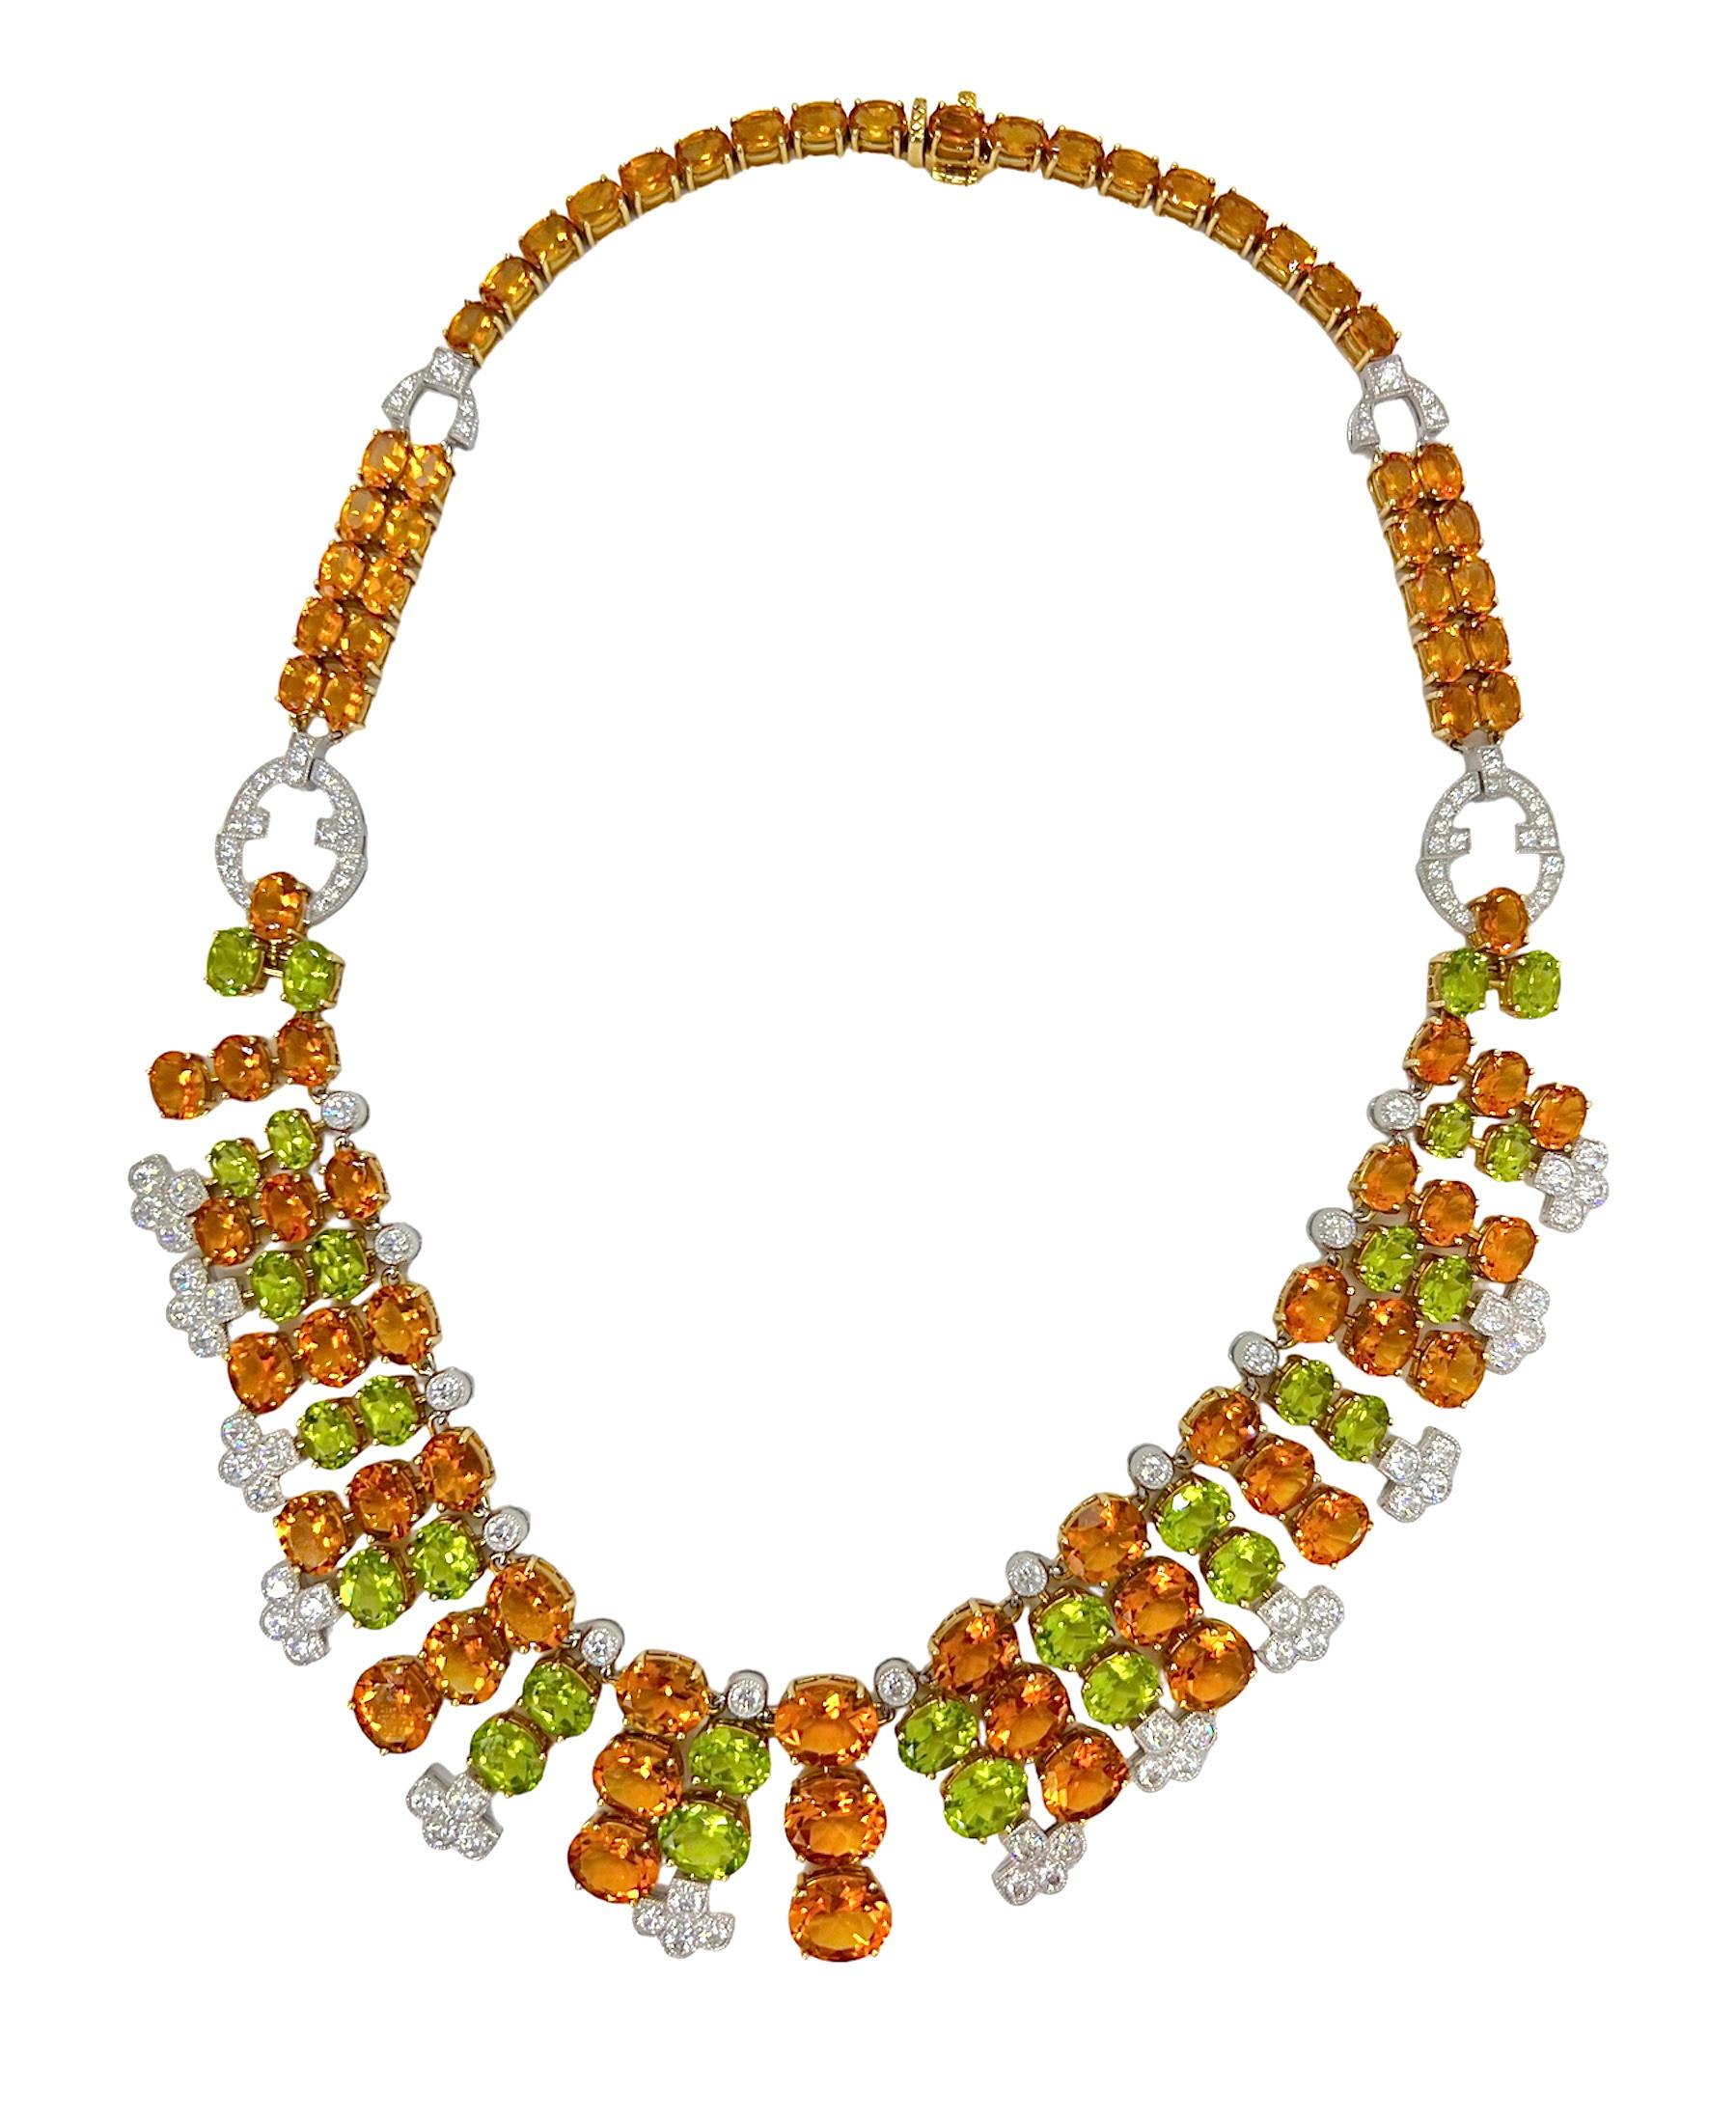 Designed by Sophia D. this 18K yellow gold necklace features a 3.78 carat diamond, 64.04 carat citrine and 8.65 carat peridot.

Sophia D by Joseph Dardashti LTD has been known worldwide for 35 years and are inspired by classic Art Deco design that